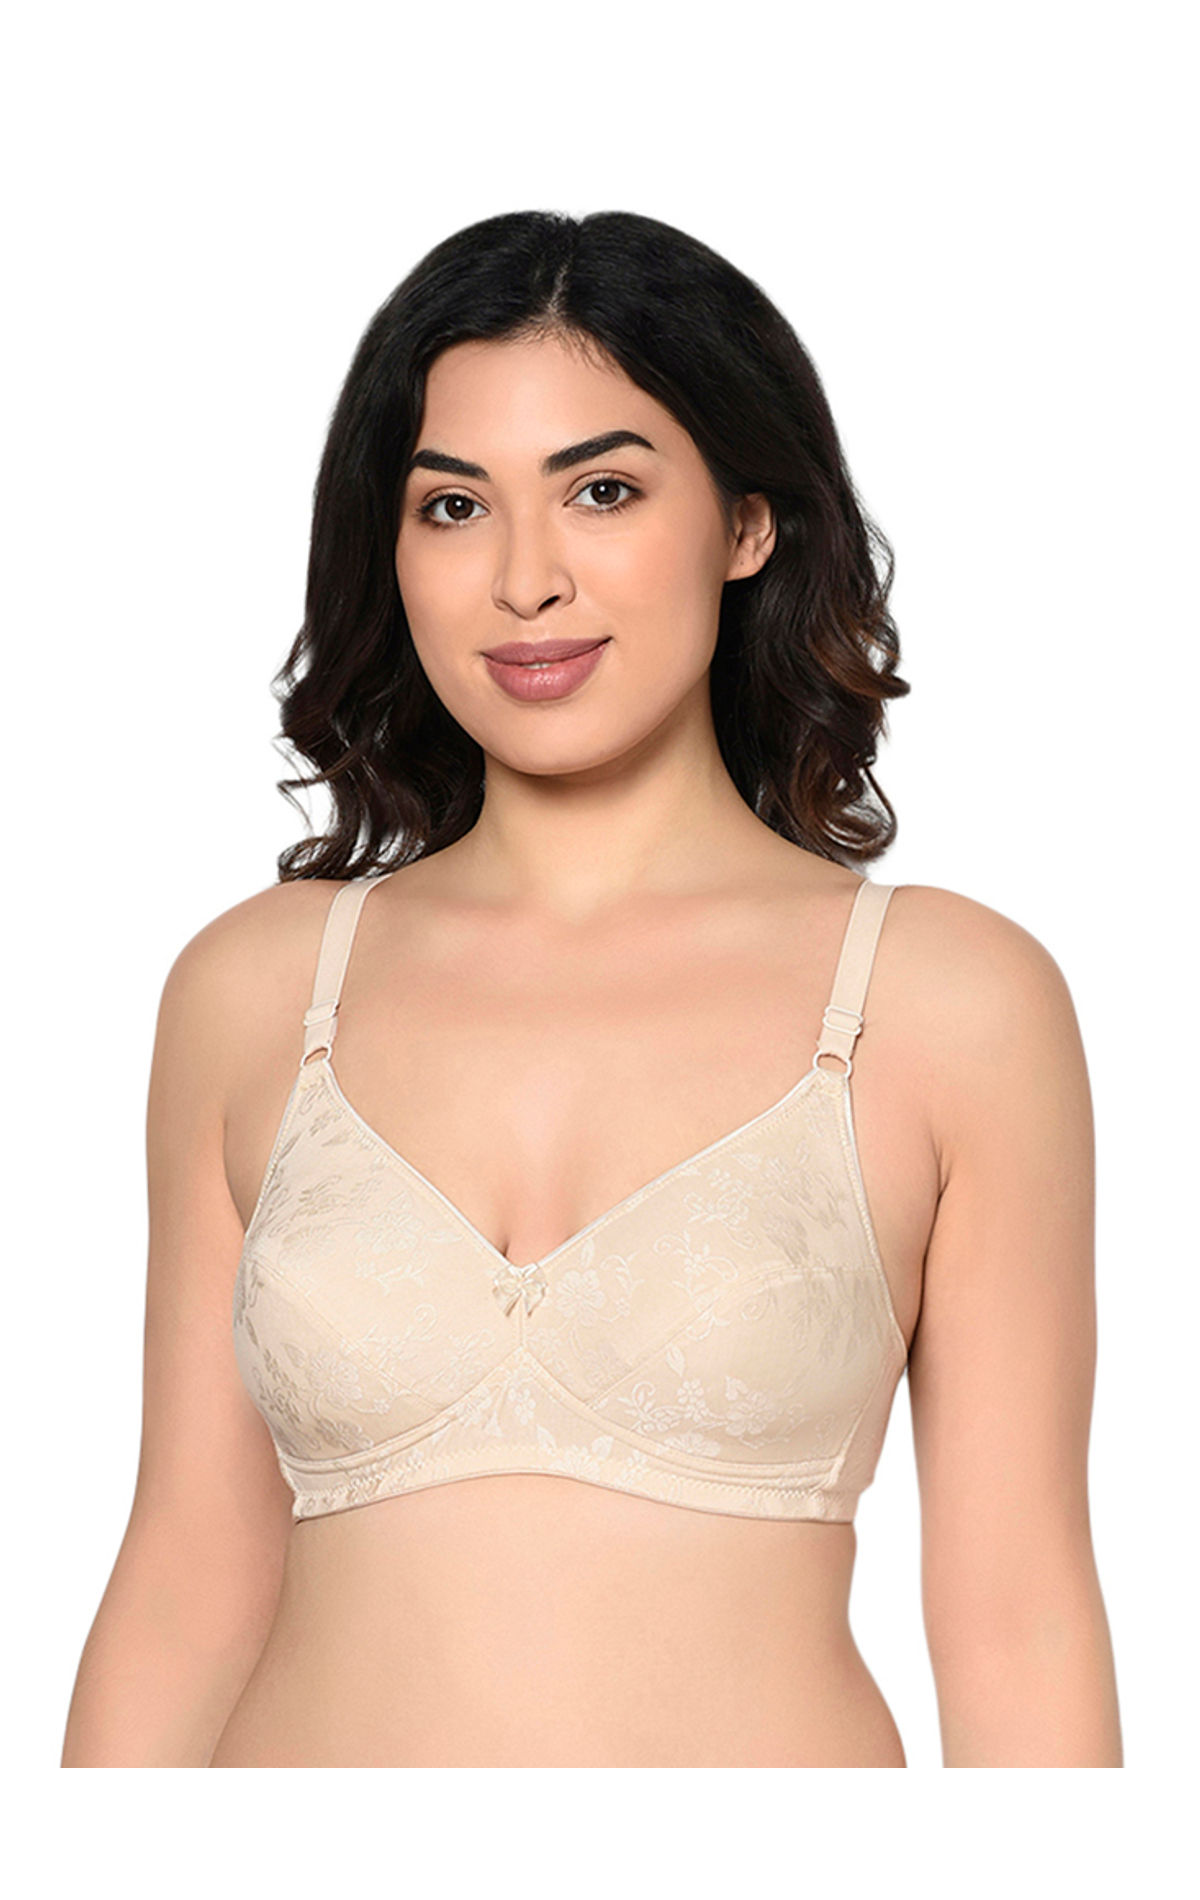 Bodycare 32D Size Bras Price Starting From Rs 216. Find Verified